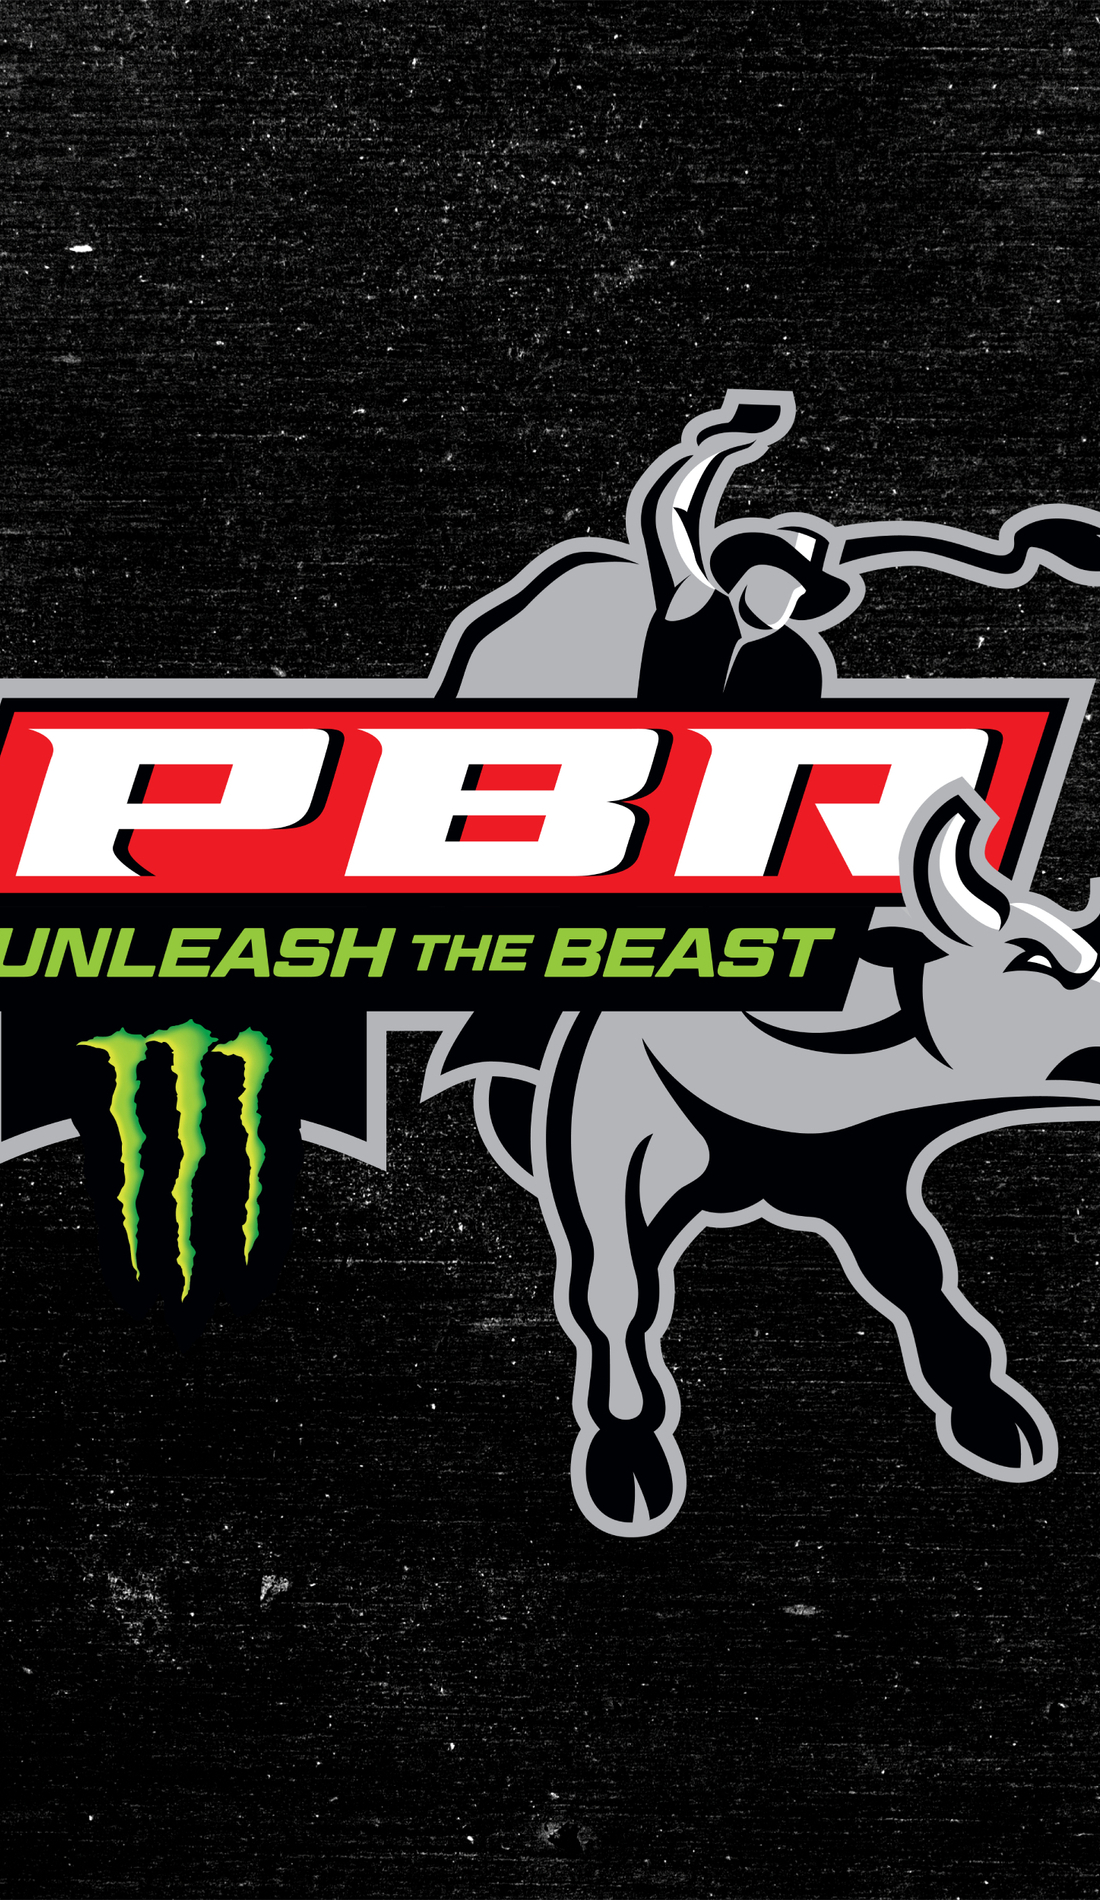 A PBR: Unleash the Beast live event